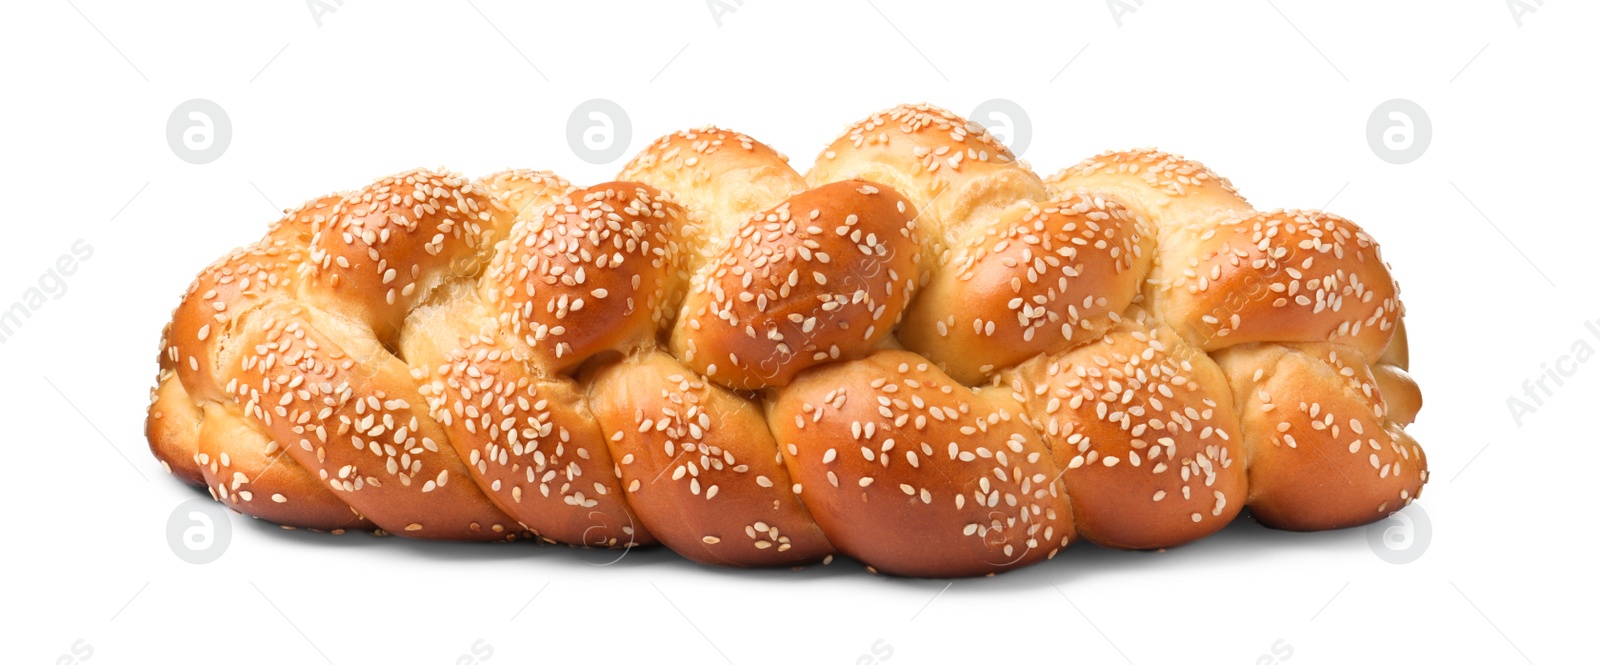 Photo of Homemade braided bread with sesame seeds isolated on white. Traditional Shabbat challah